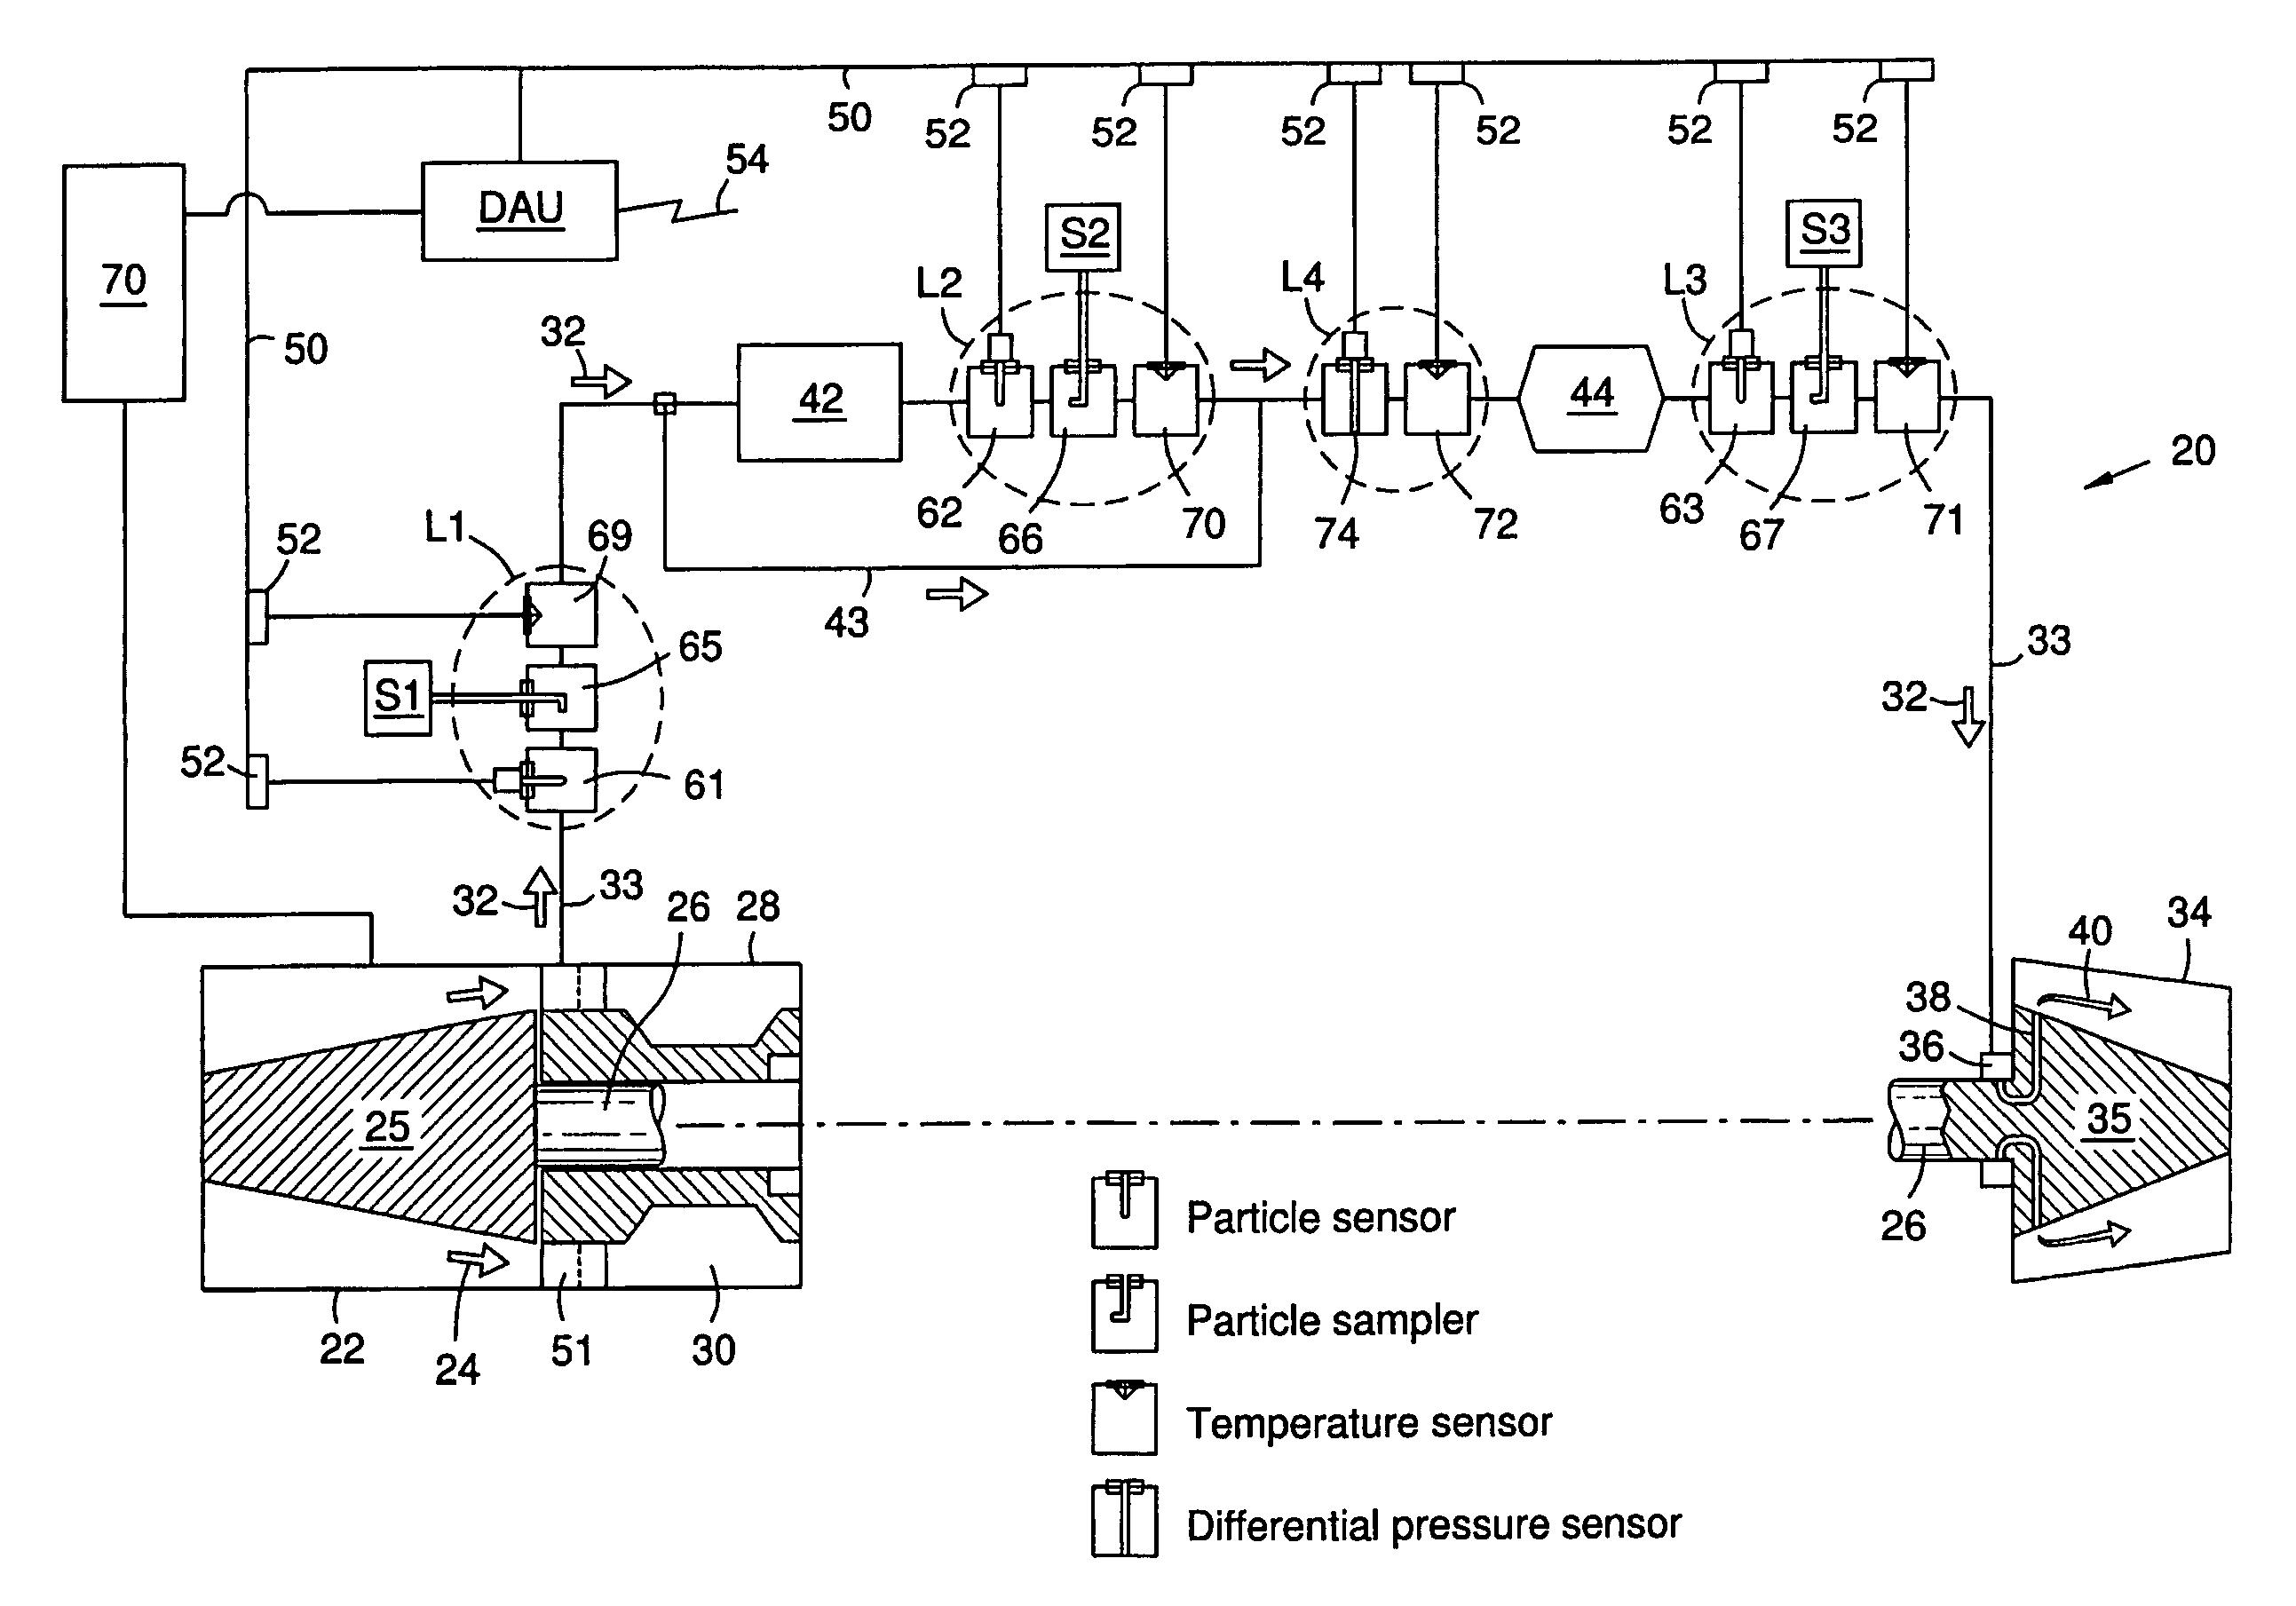 Method and apparatus for monitoring particles in a gas turbine working fluid